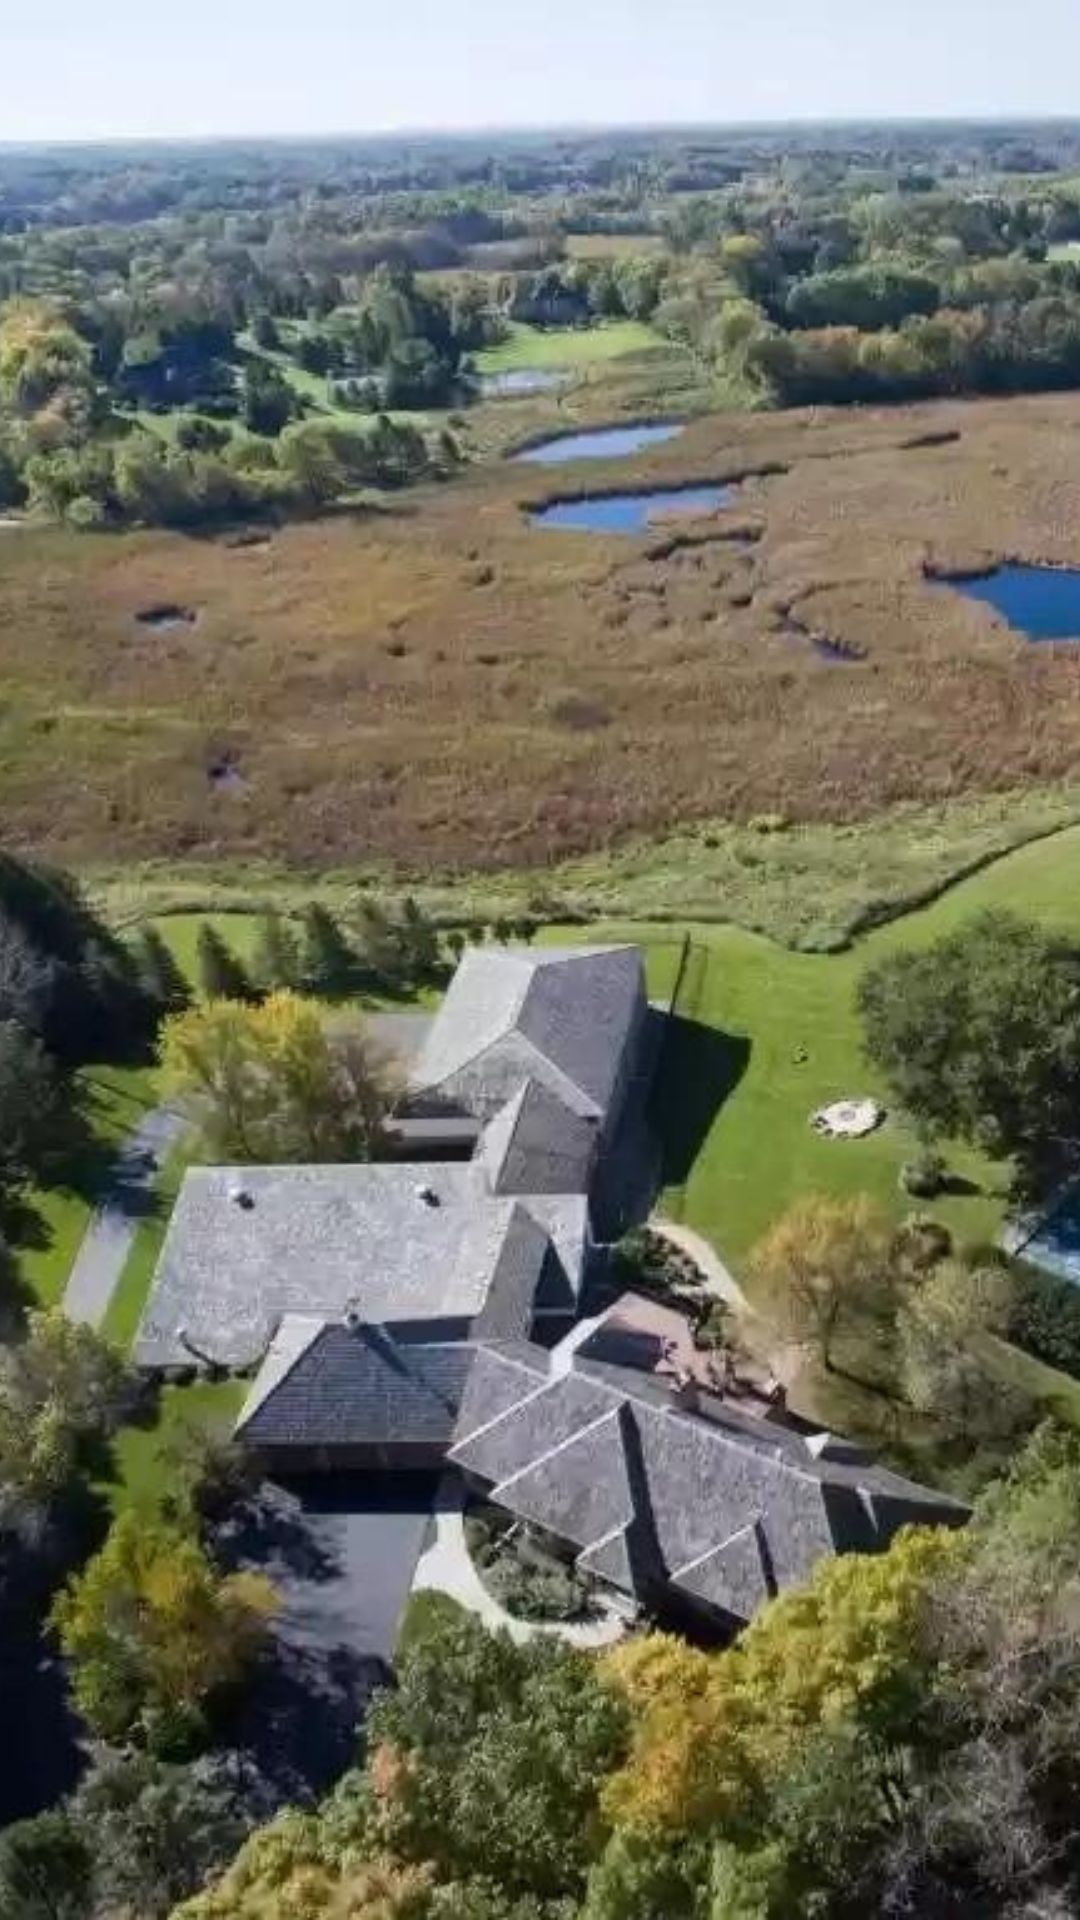 Former Patriot Randy Moss Selling Lincoln Home (Source: GoLocalProv)